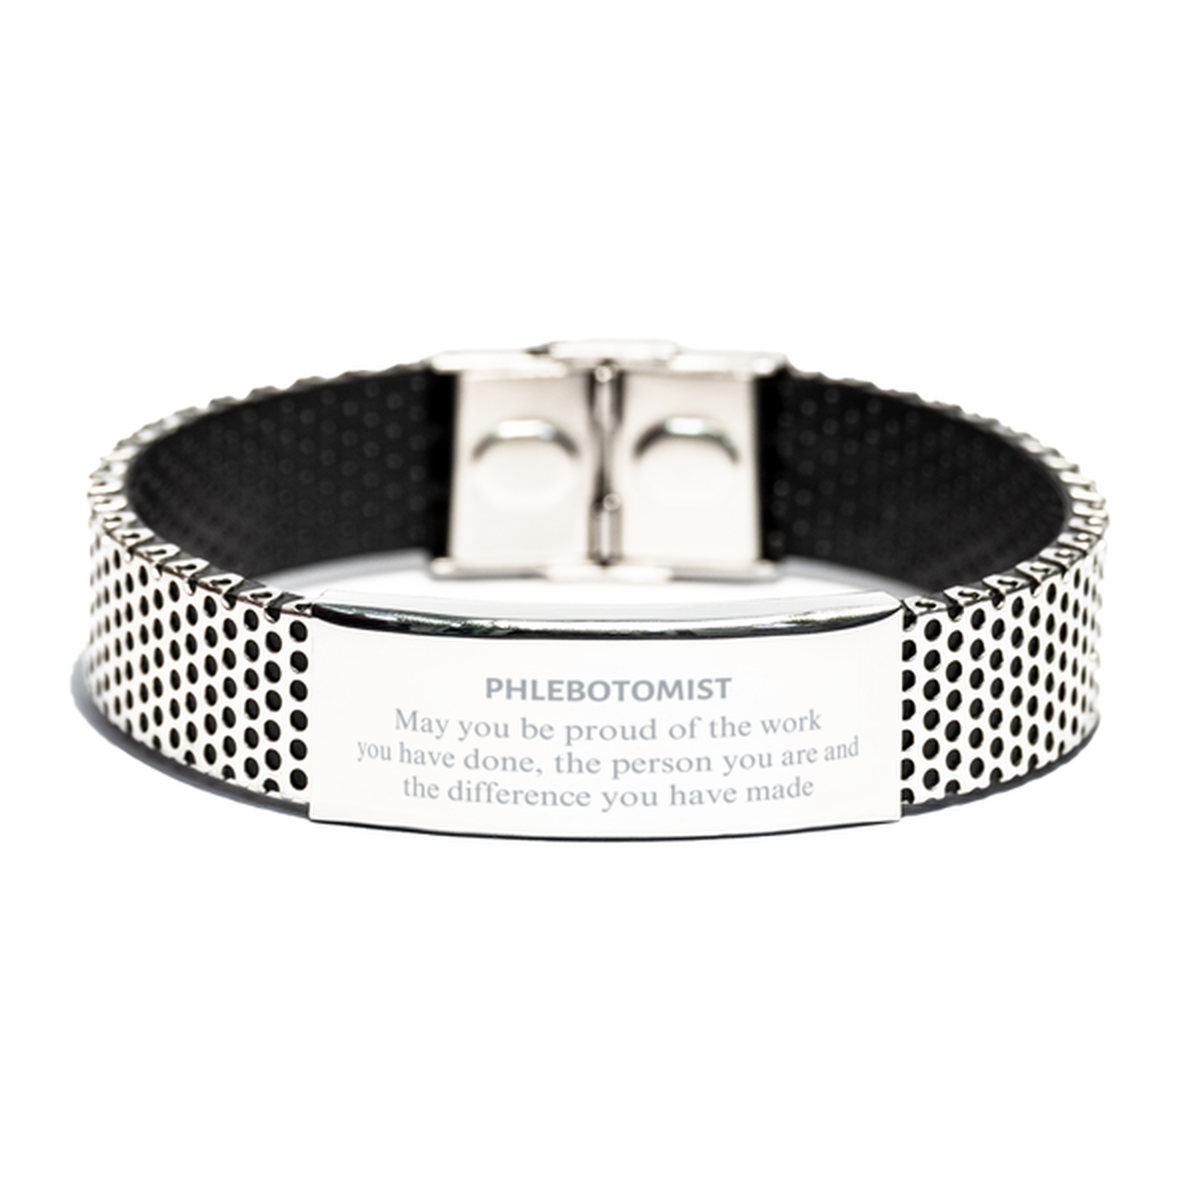 Phlebotomist May you be proud of the work you have done, Retirement Phlebotomist Stainless Steel Bracelet for Colleague Appreciation Gifts Amazing for Phlebotomist